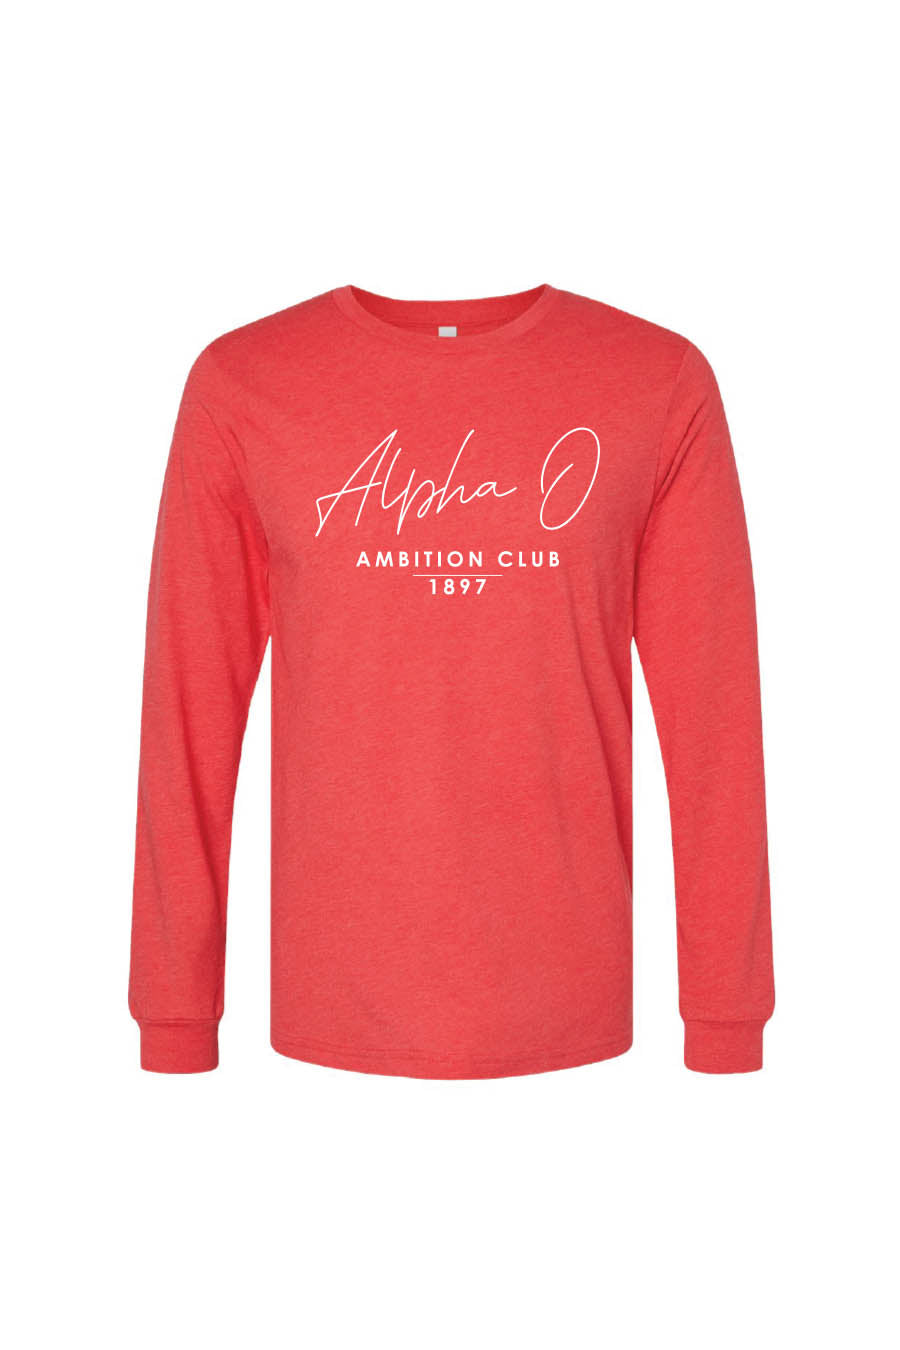 Ambition Club Long Sleeve